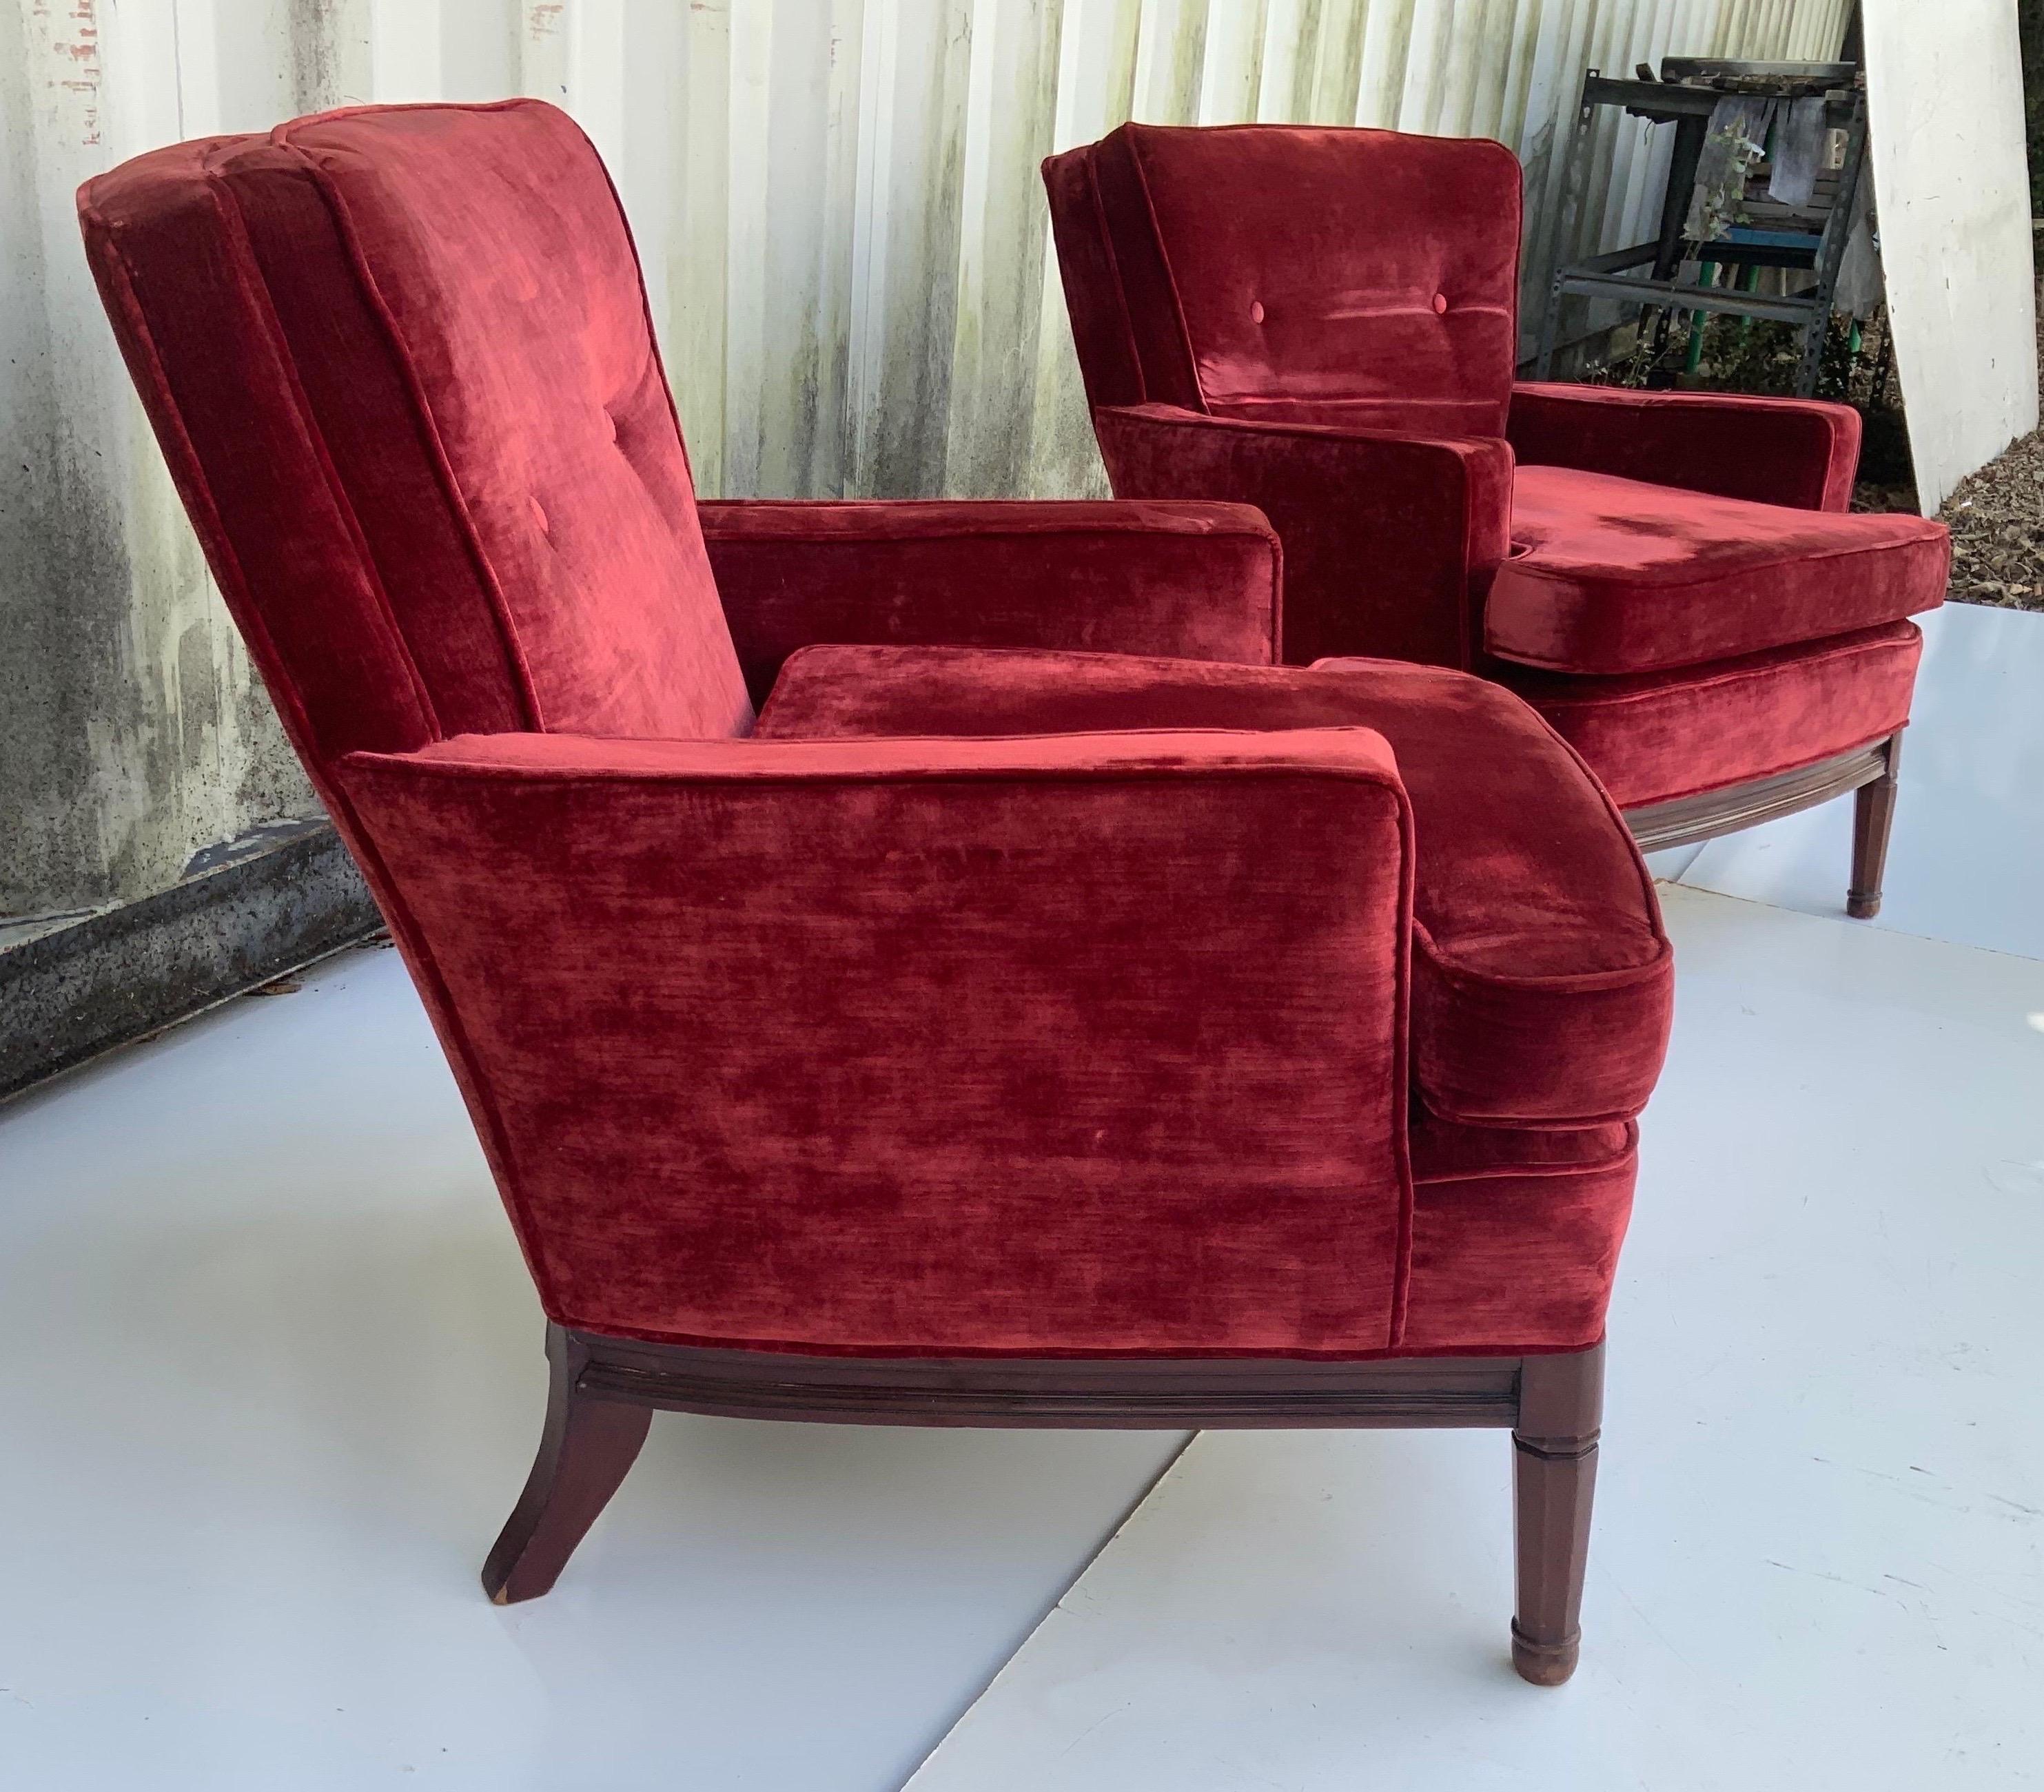 Mid-20th Century Pair of Neoclassical Maison Jansen Lounge Chairs circa 1960, 2 Pairs Available For Sale